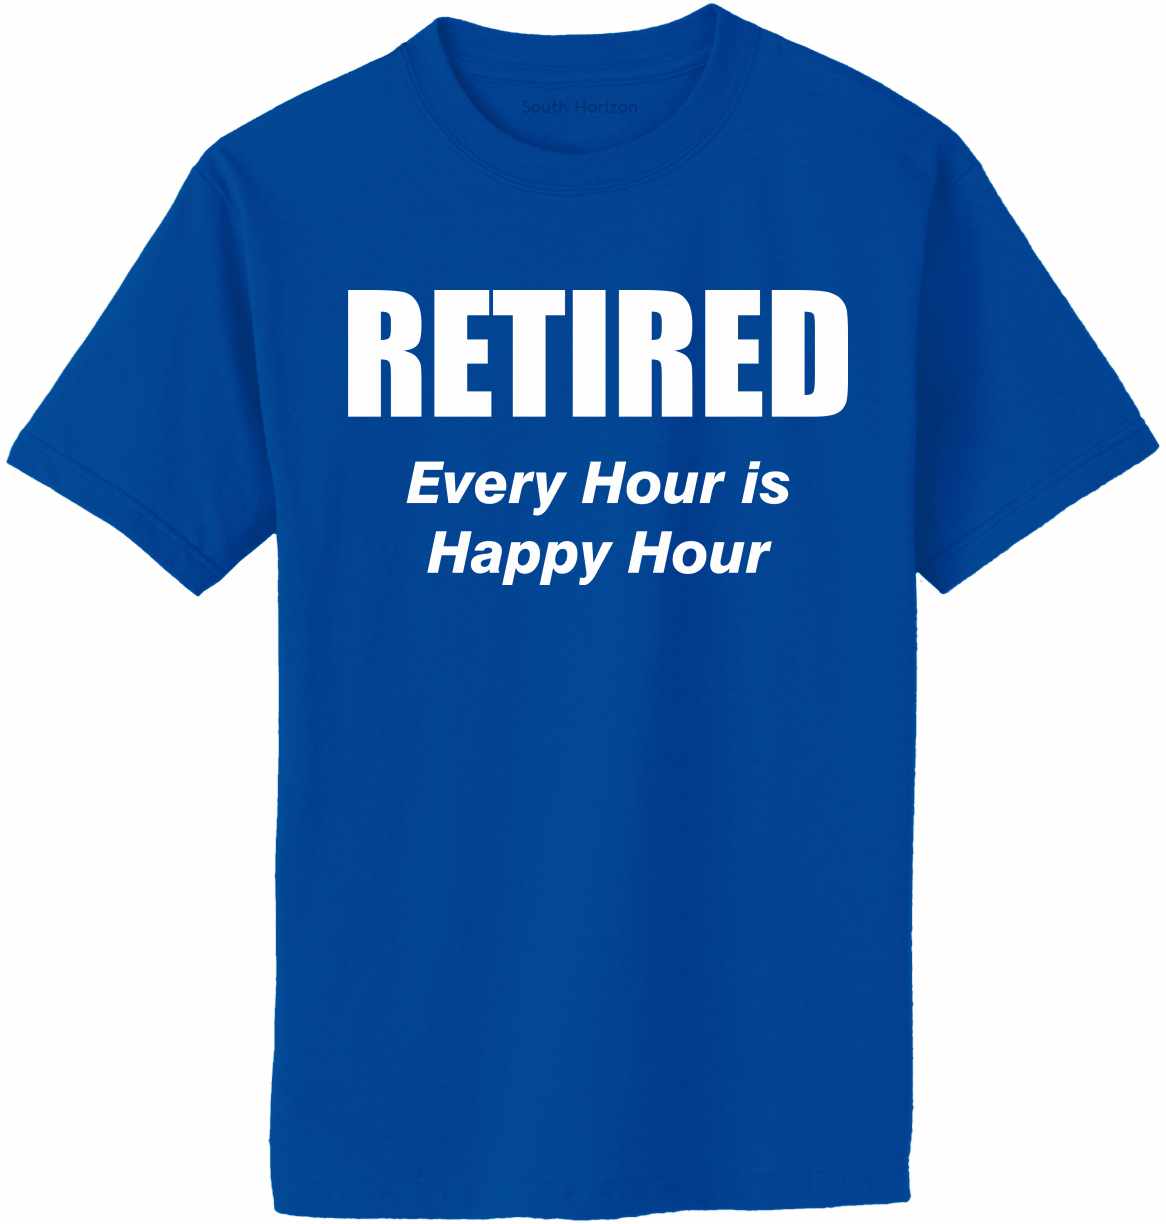 RETIRED, Every Hour Is Happy Hour Adult T-Shirt